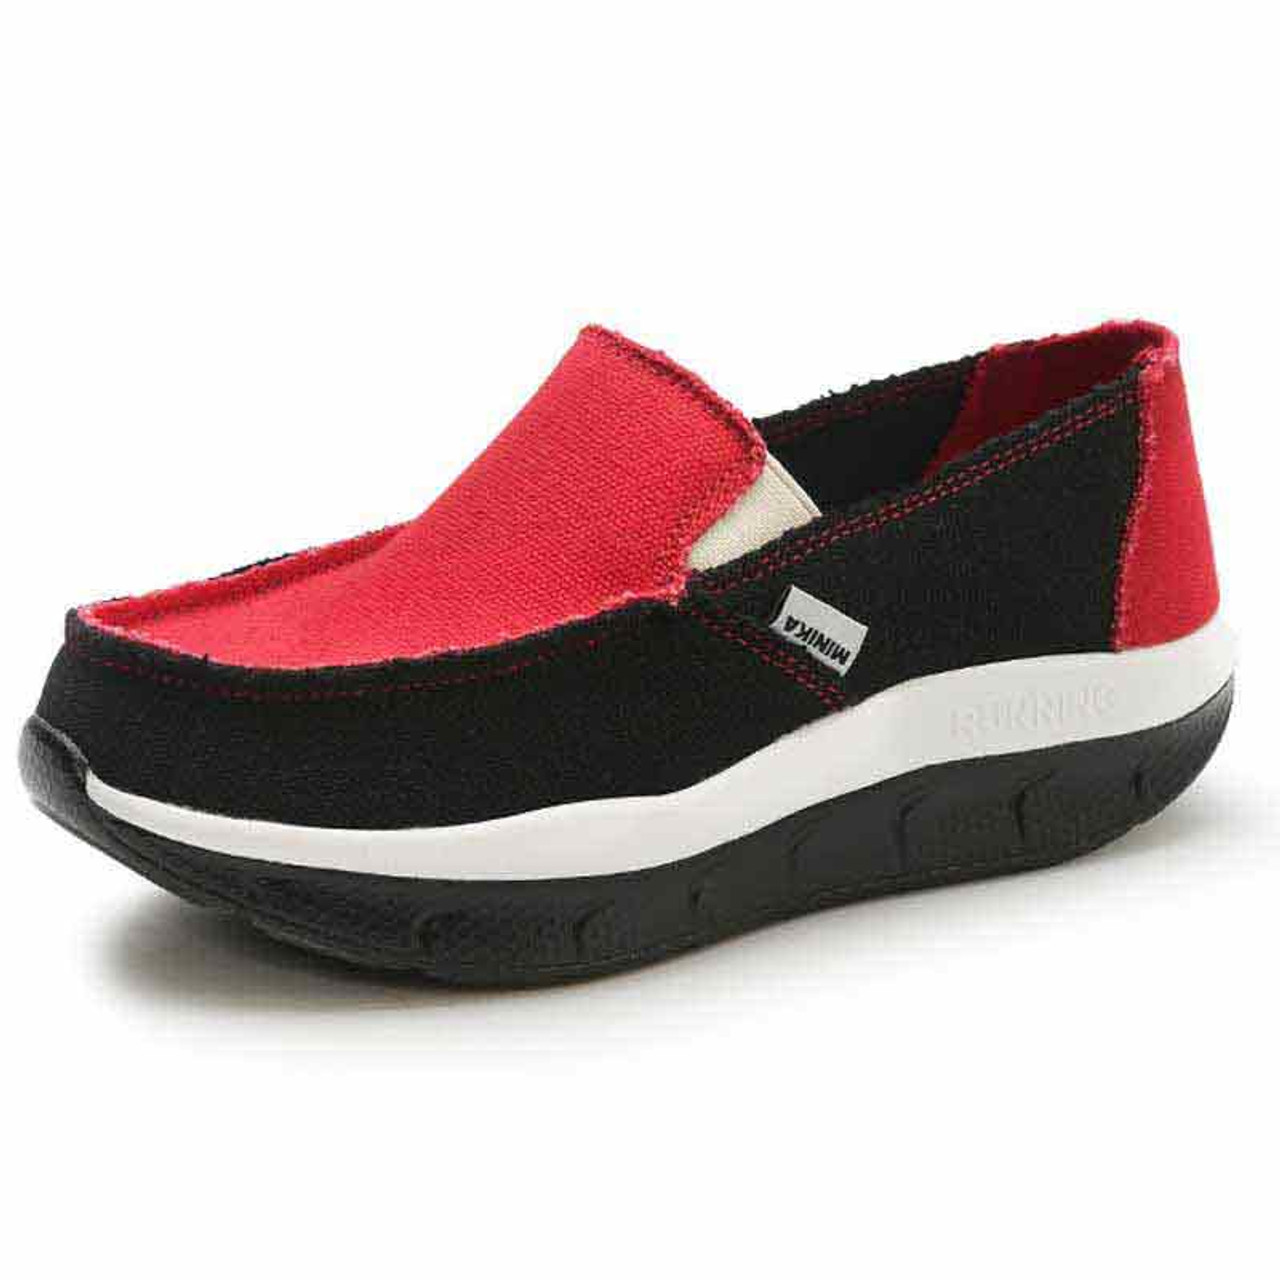 black red bottom shoes